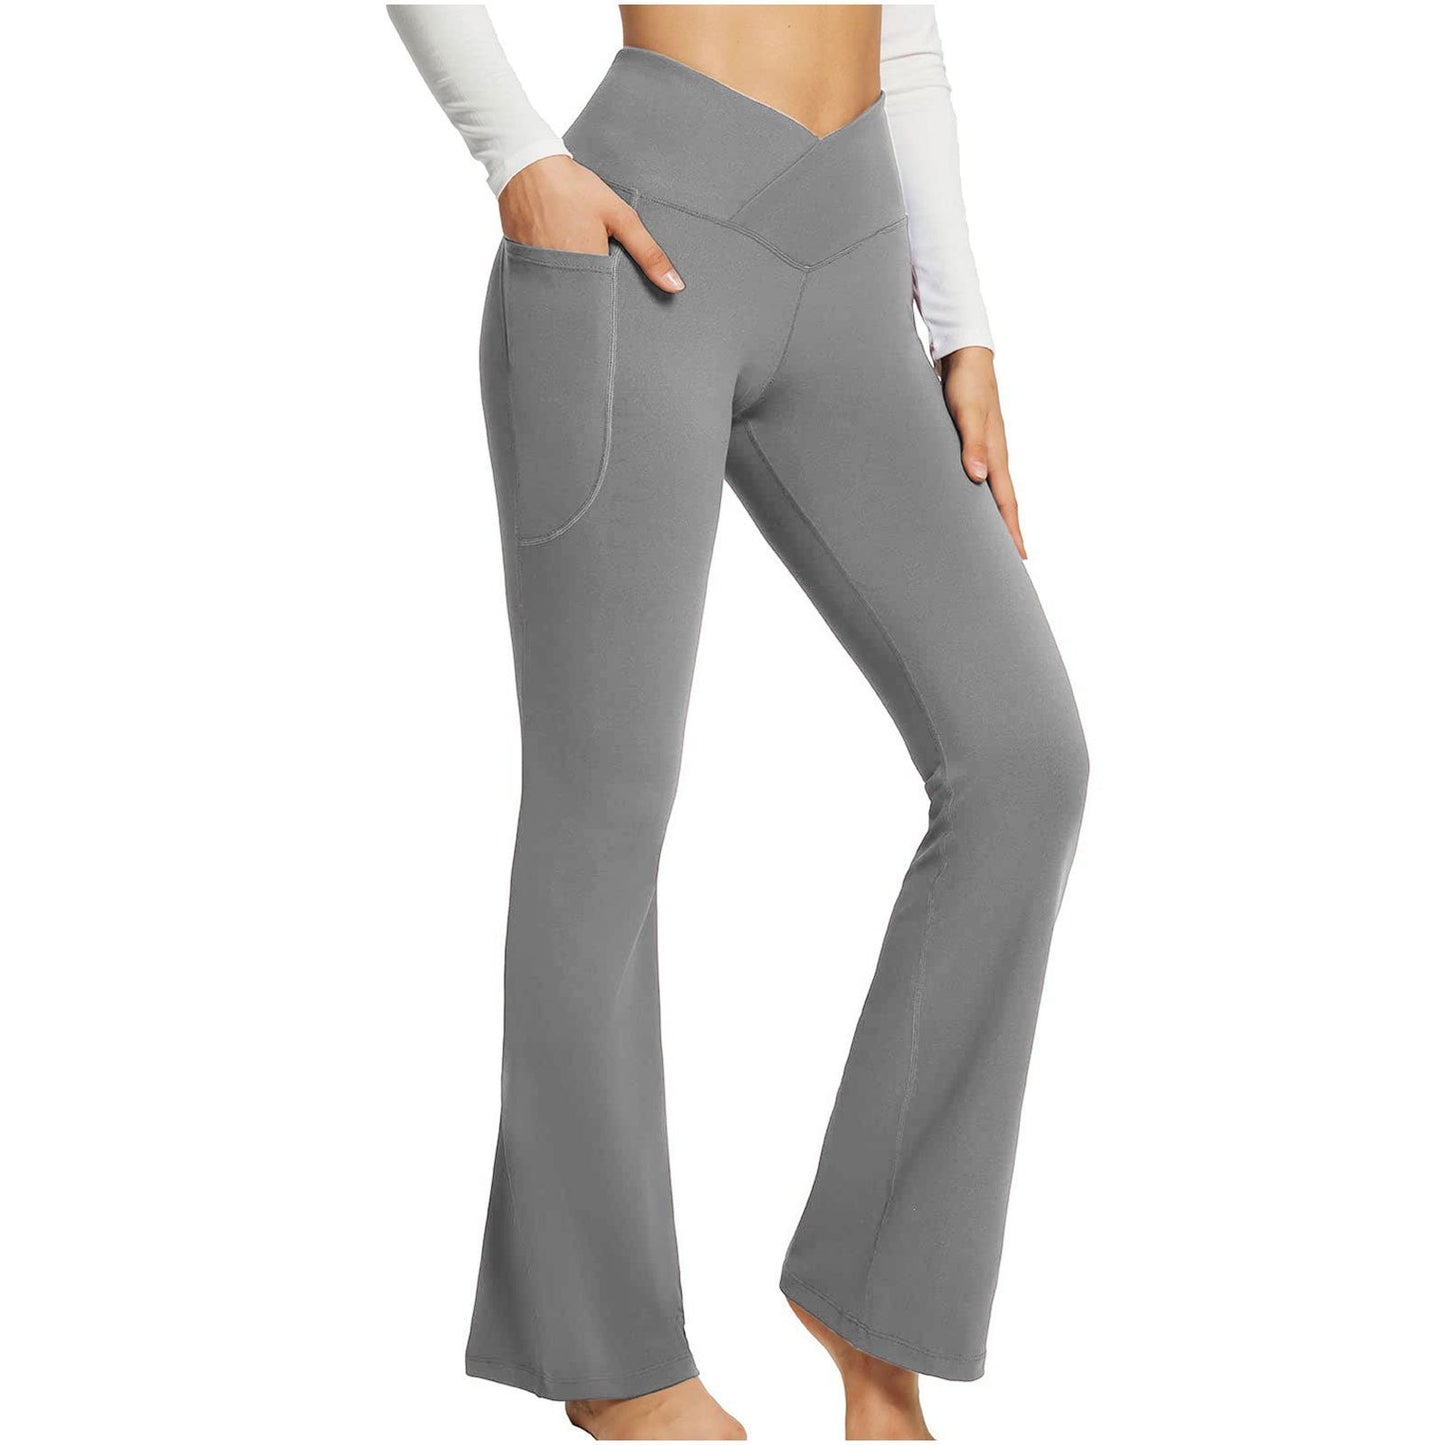 High-Waisted Lift Butt Flare Yoga Leggings With Pockets (Buy 2 Free Shipping)